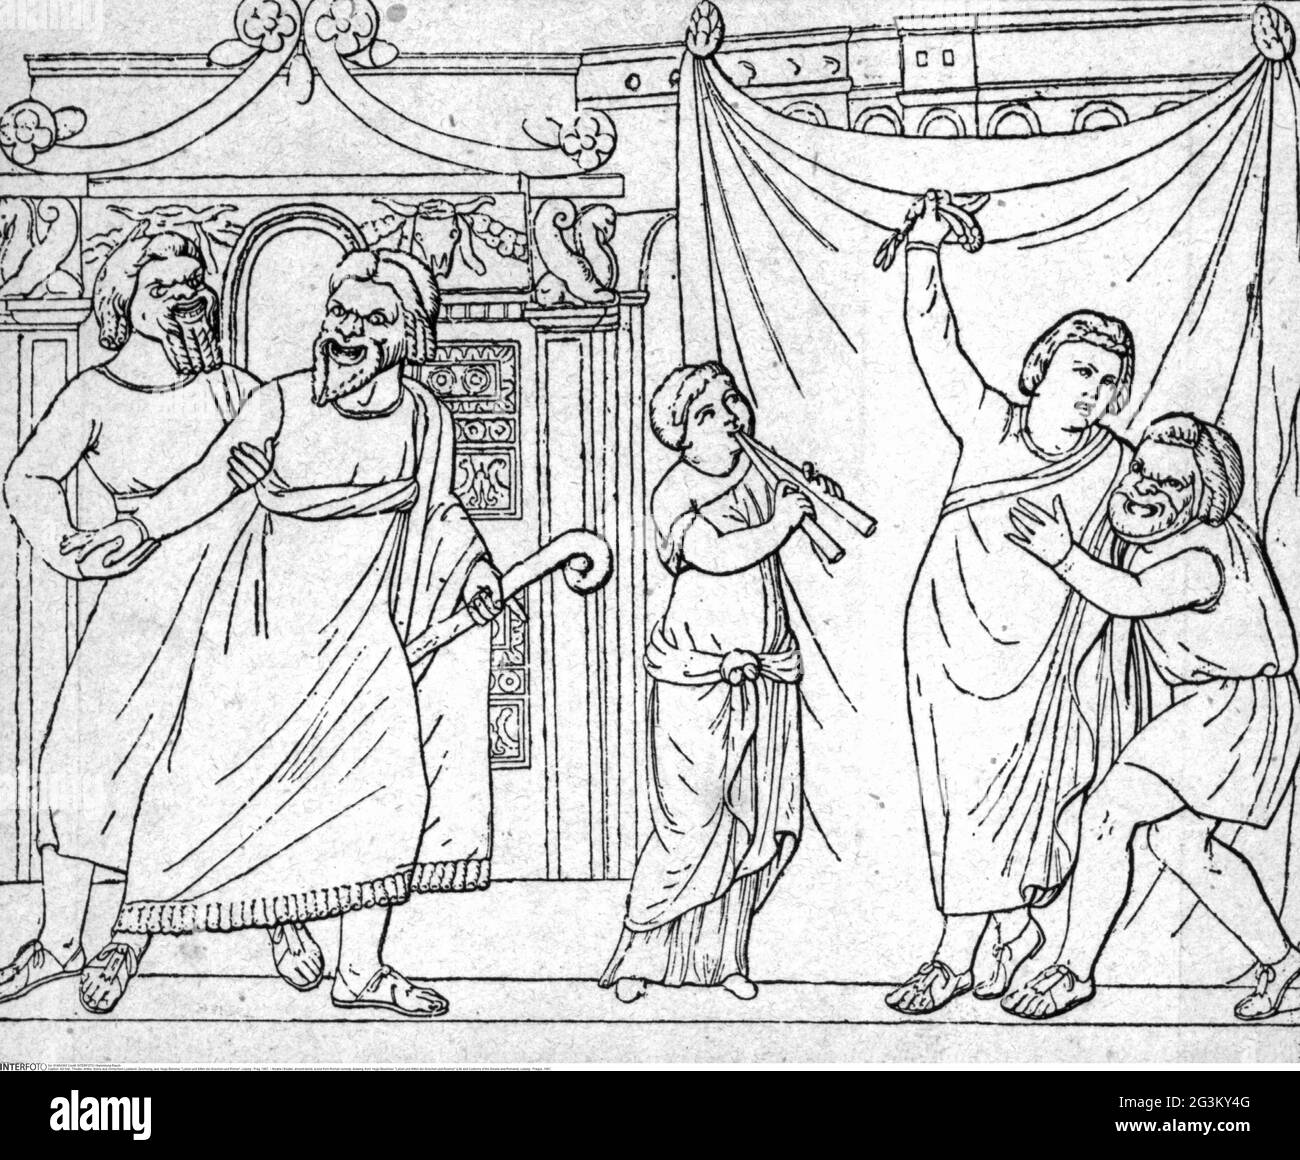 theatre / theater, ancient world, scene from Roman comedy, drawing, from: Hugo Bluemner, ARTIST'S COPYRIGHT HAS NOT TO BE CLEARED Stock Photo